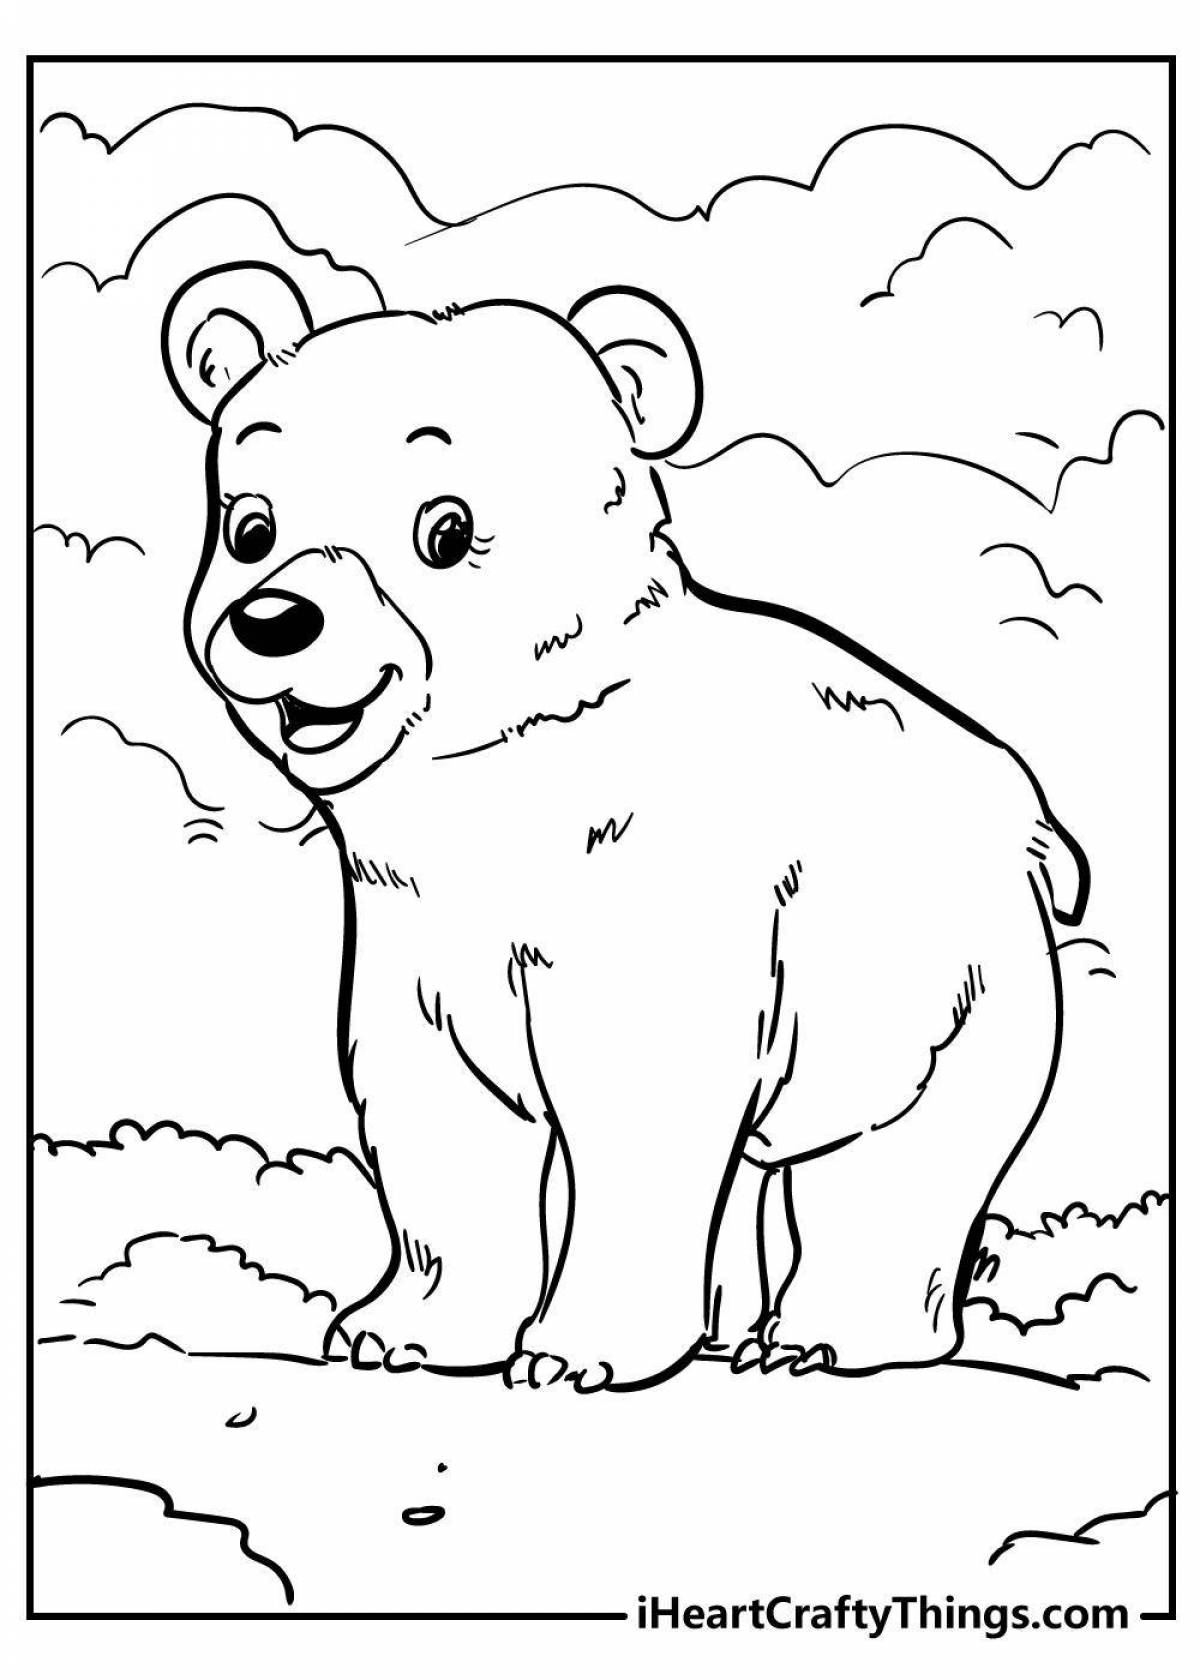 Glittering teddy bear coloring book for 5-6 year olds